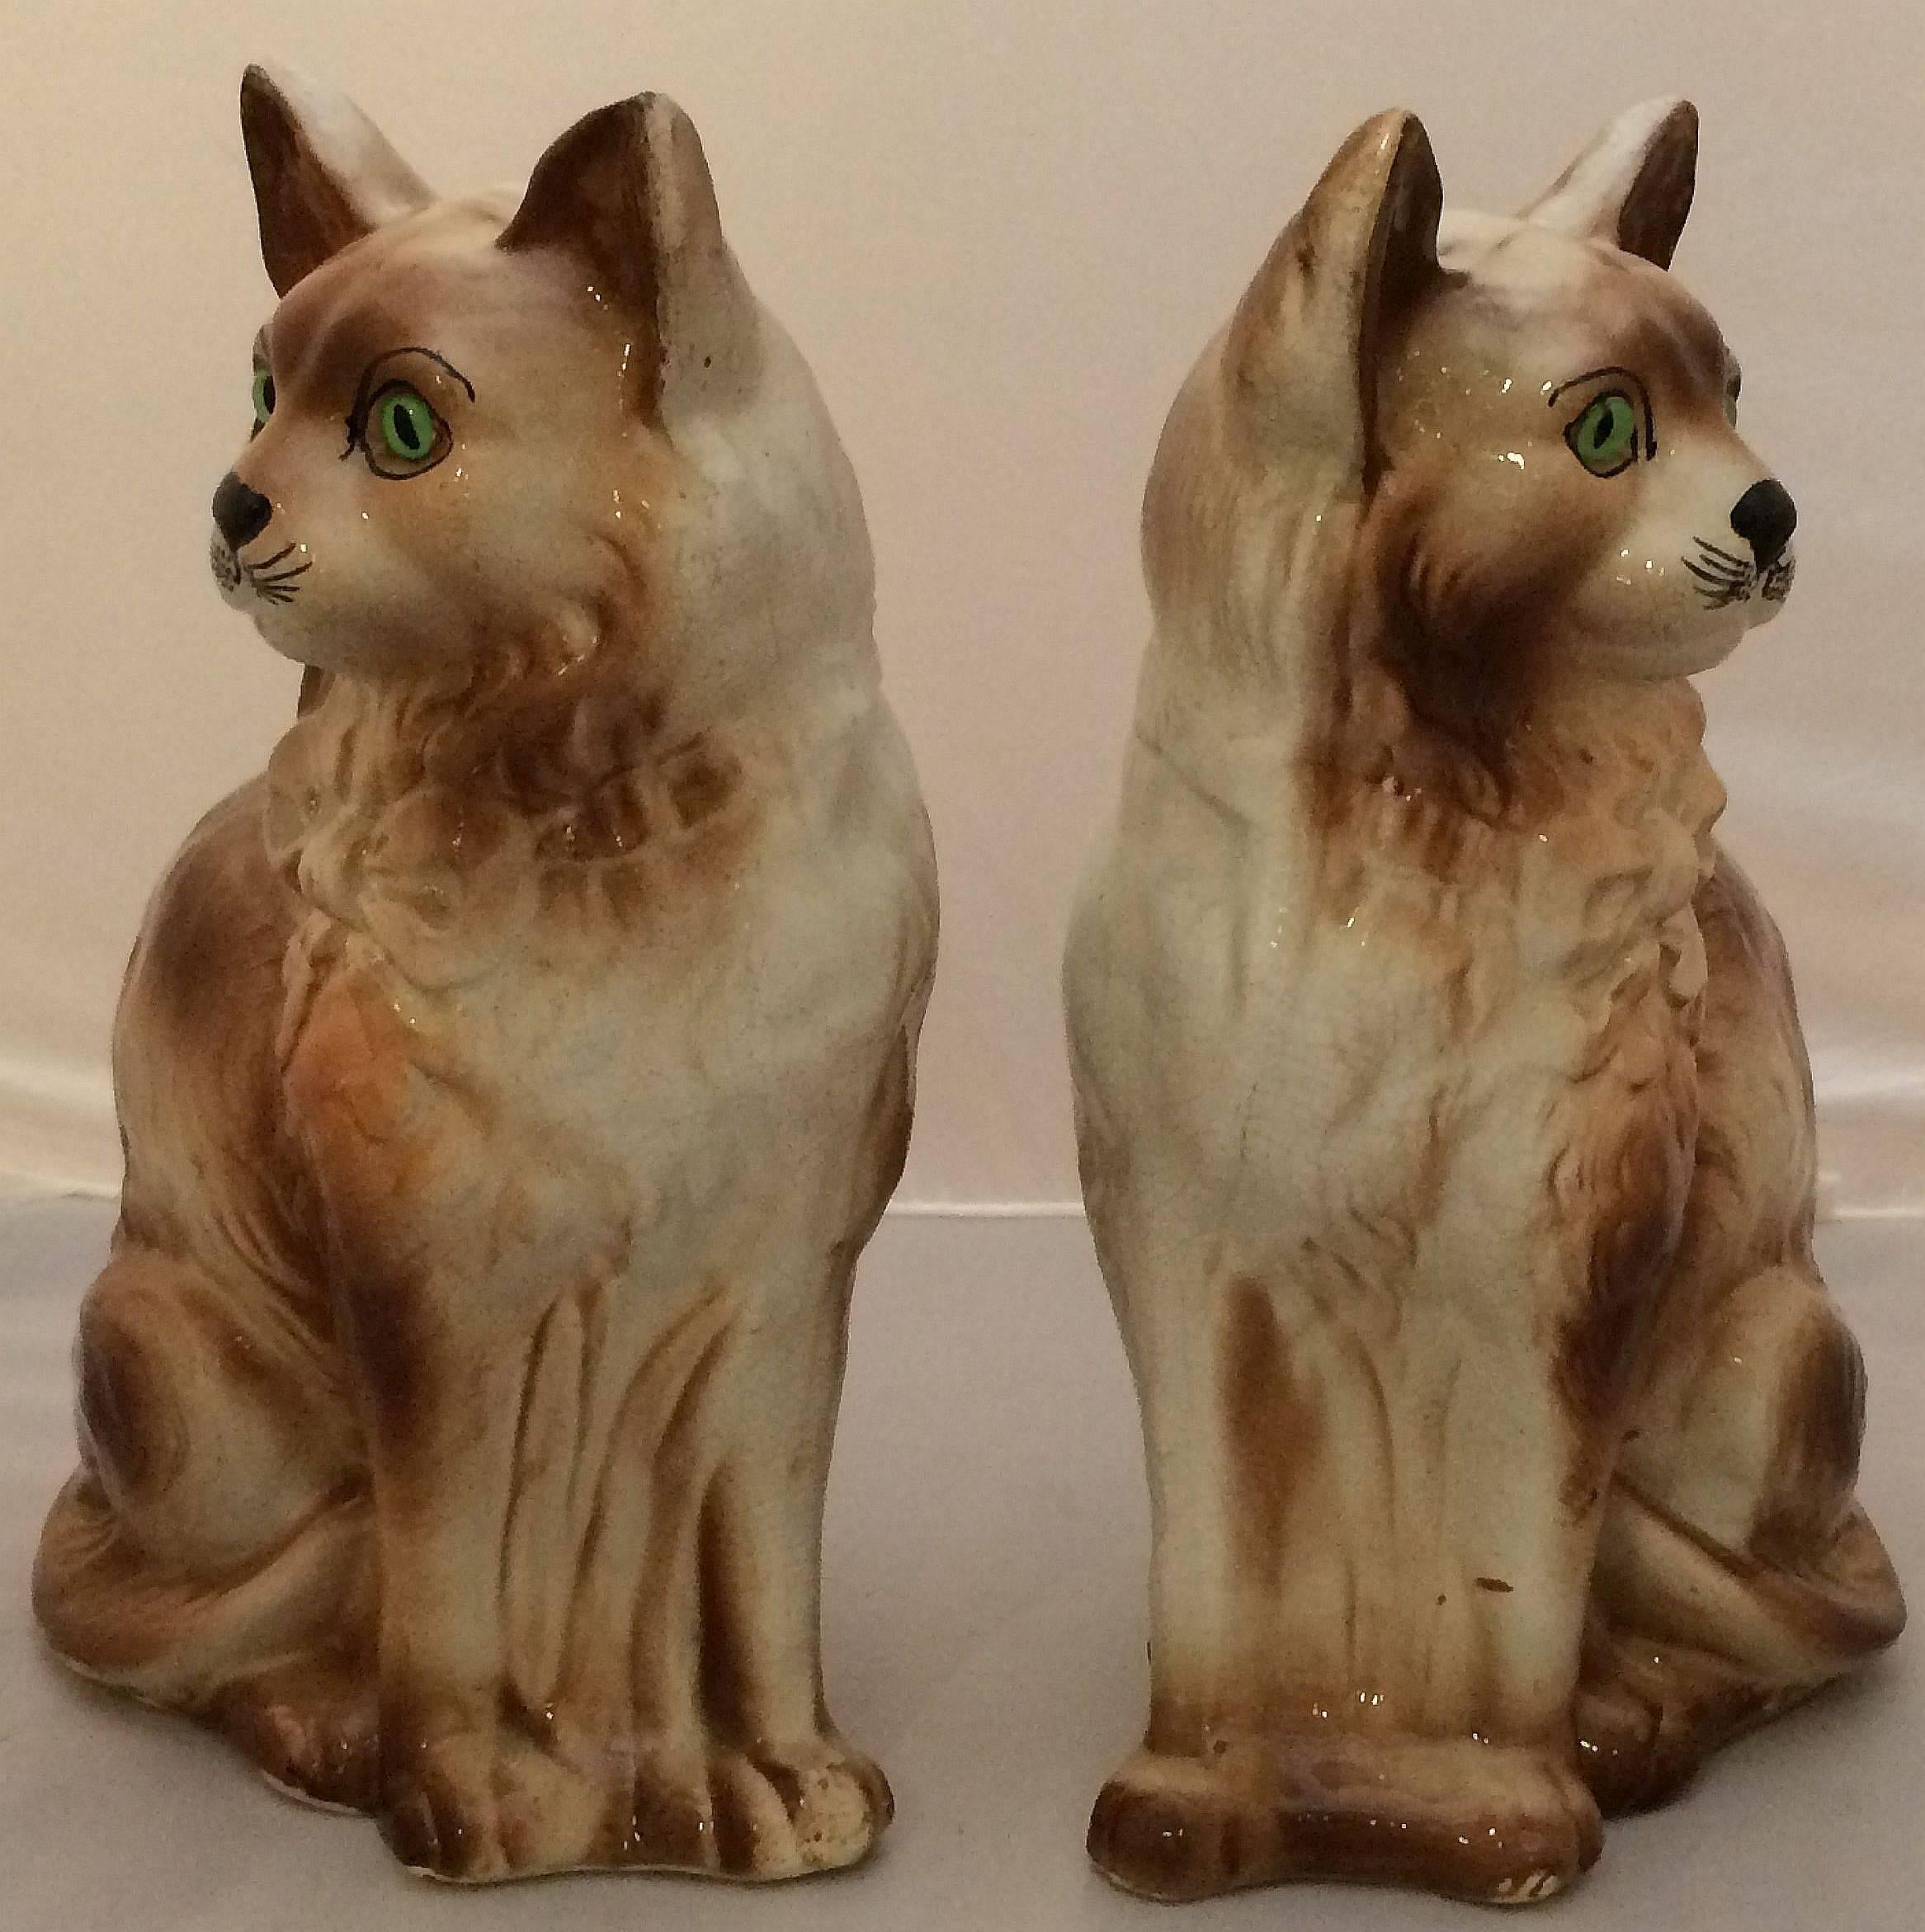 A fine pair of Scottish ceramic cats from the Bridgeness pottery near Bo'ness, each cat featuring glass eyes and Fine modeling in the round.

 Rd. No. 523391 - Registered in 1908

 The town and former port of Bo'ness (Borrowstounness) stands on the